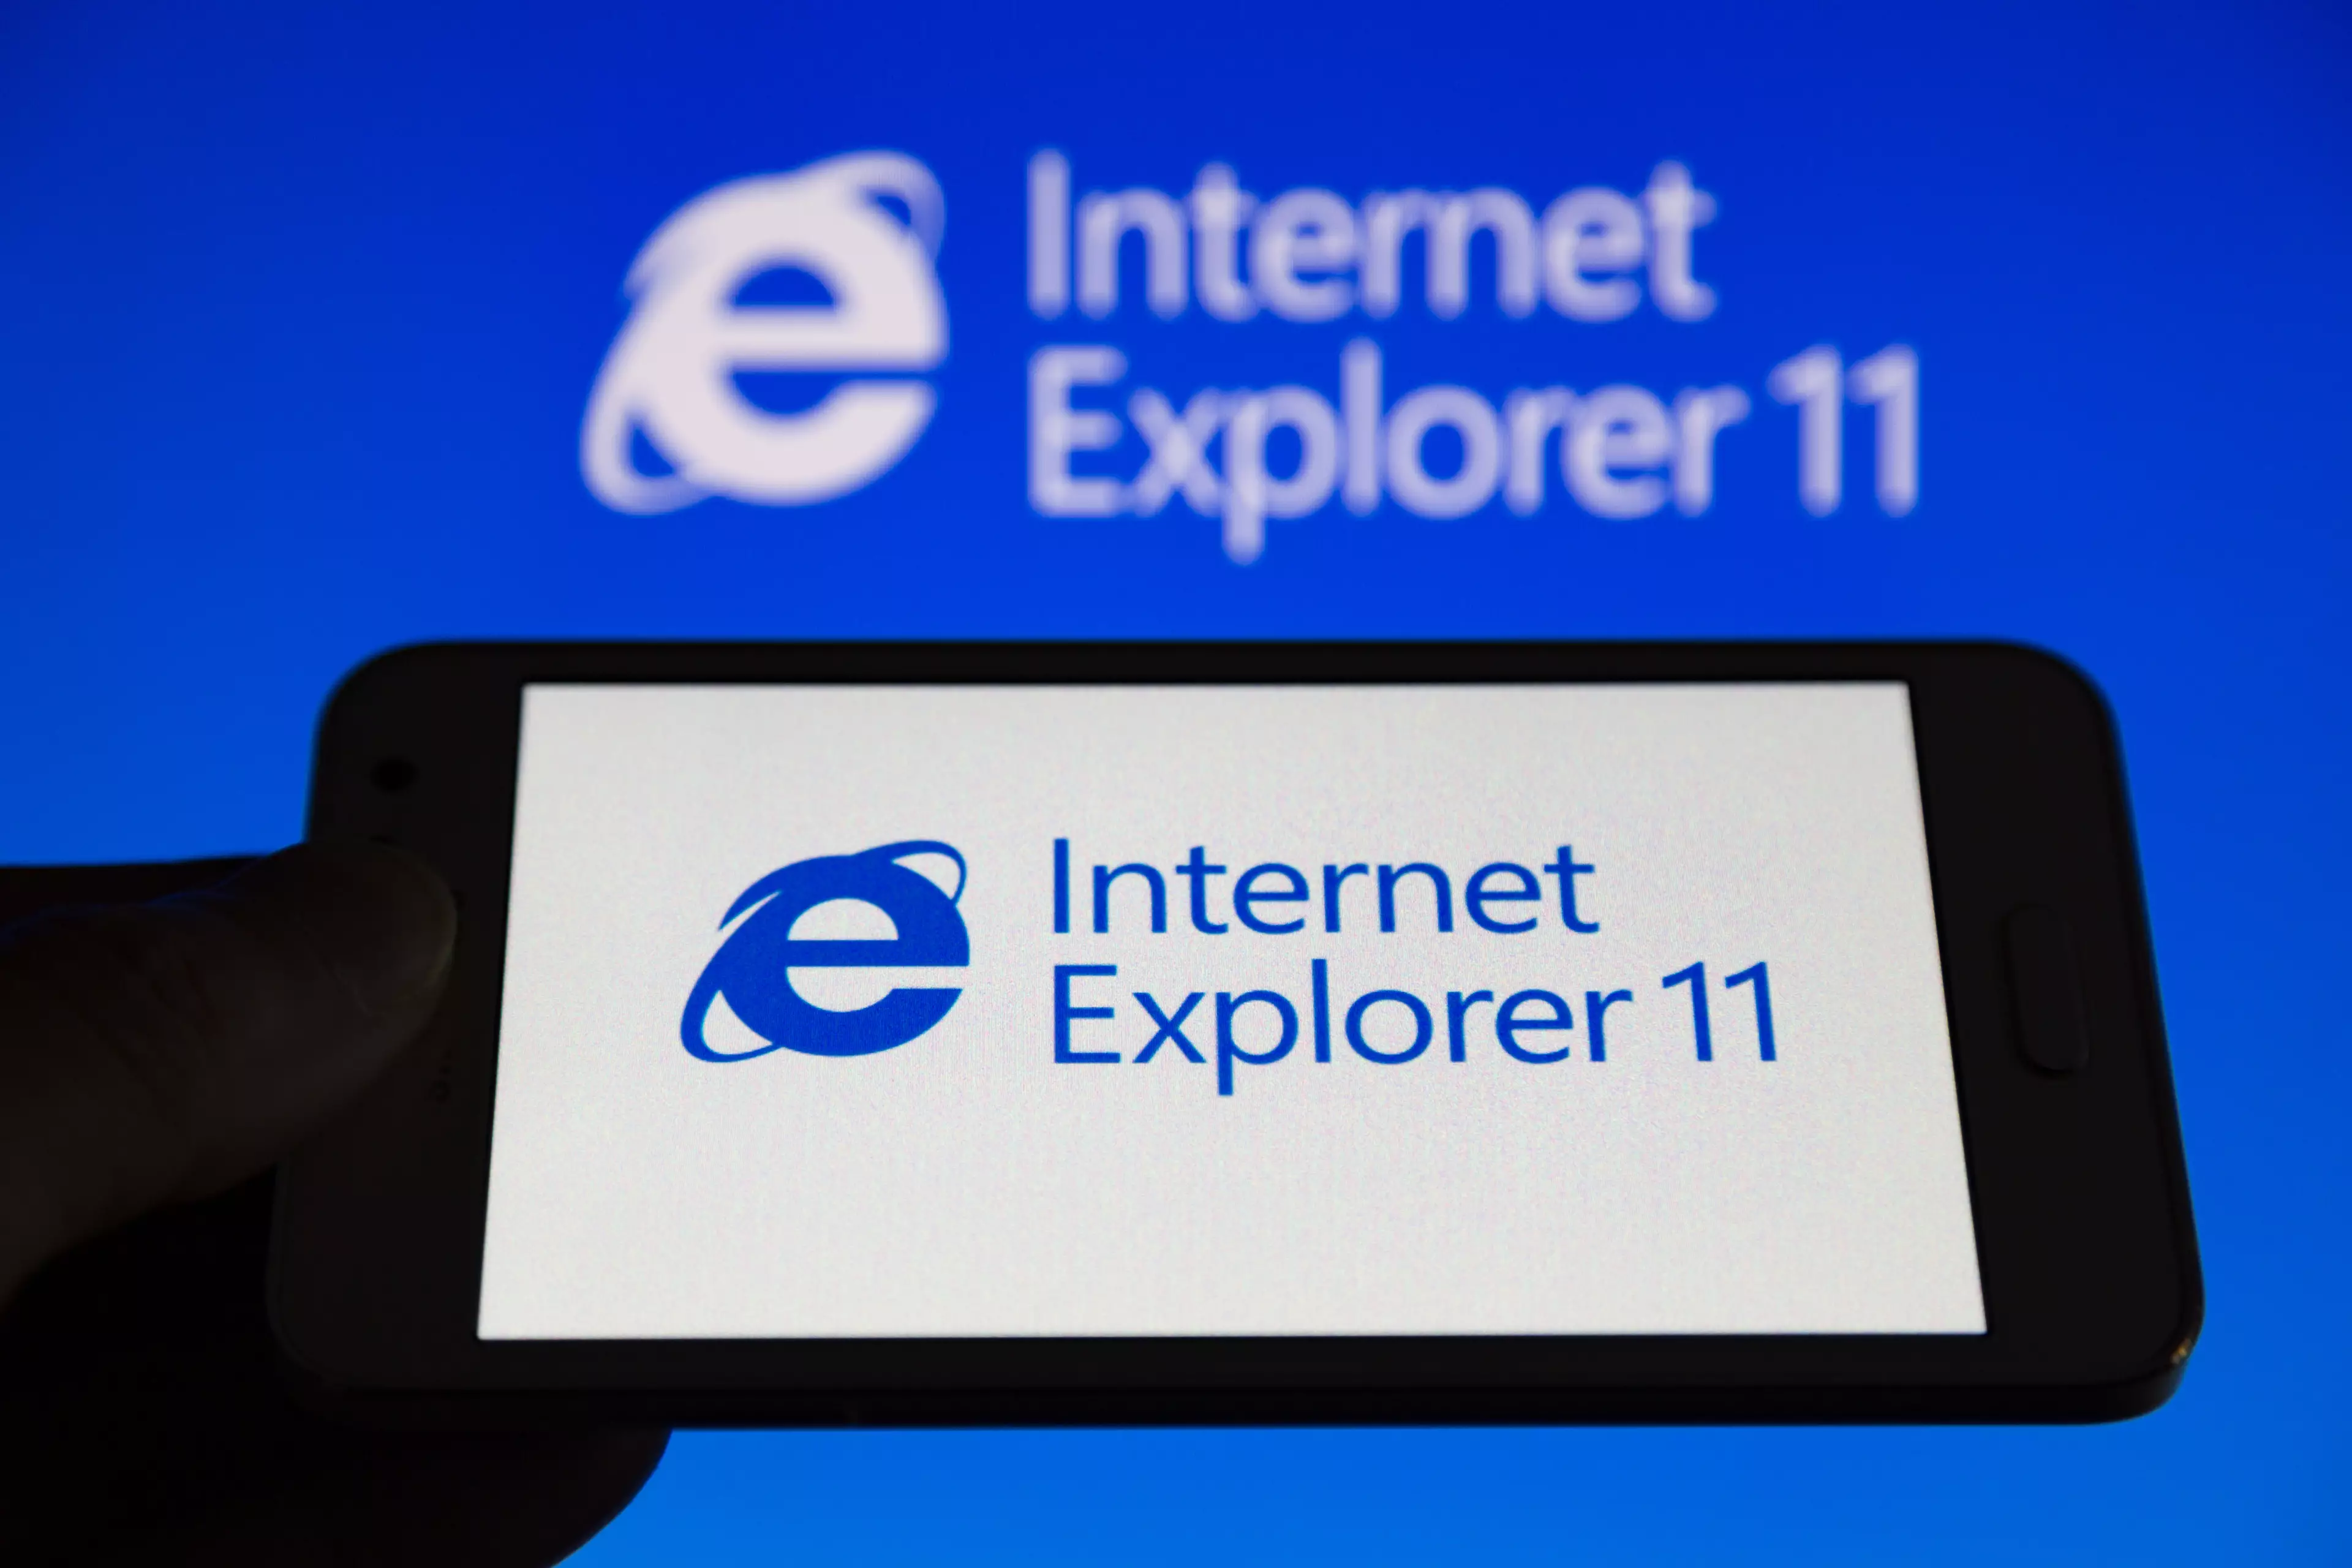 Internet Explorer will soon be a thing of the past.